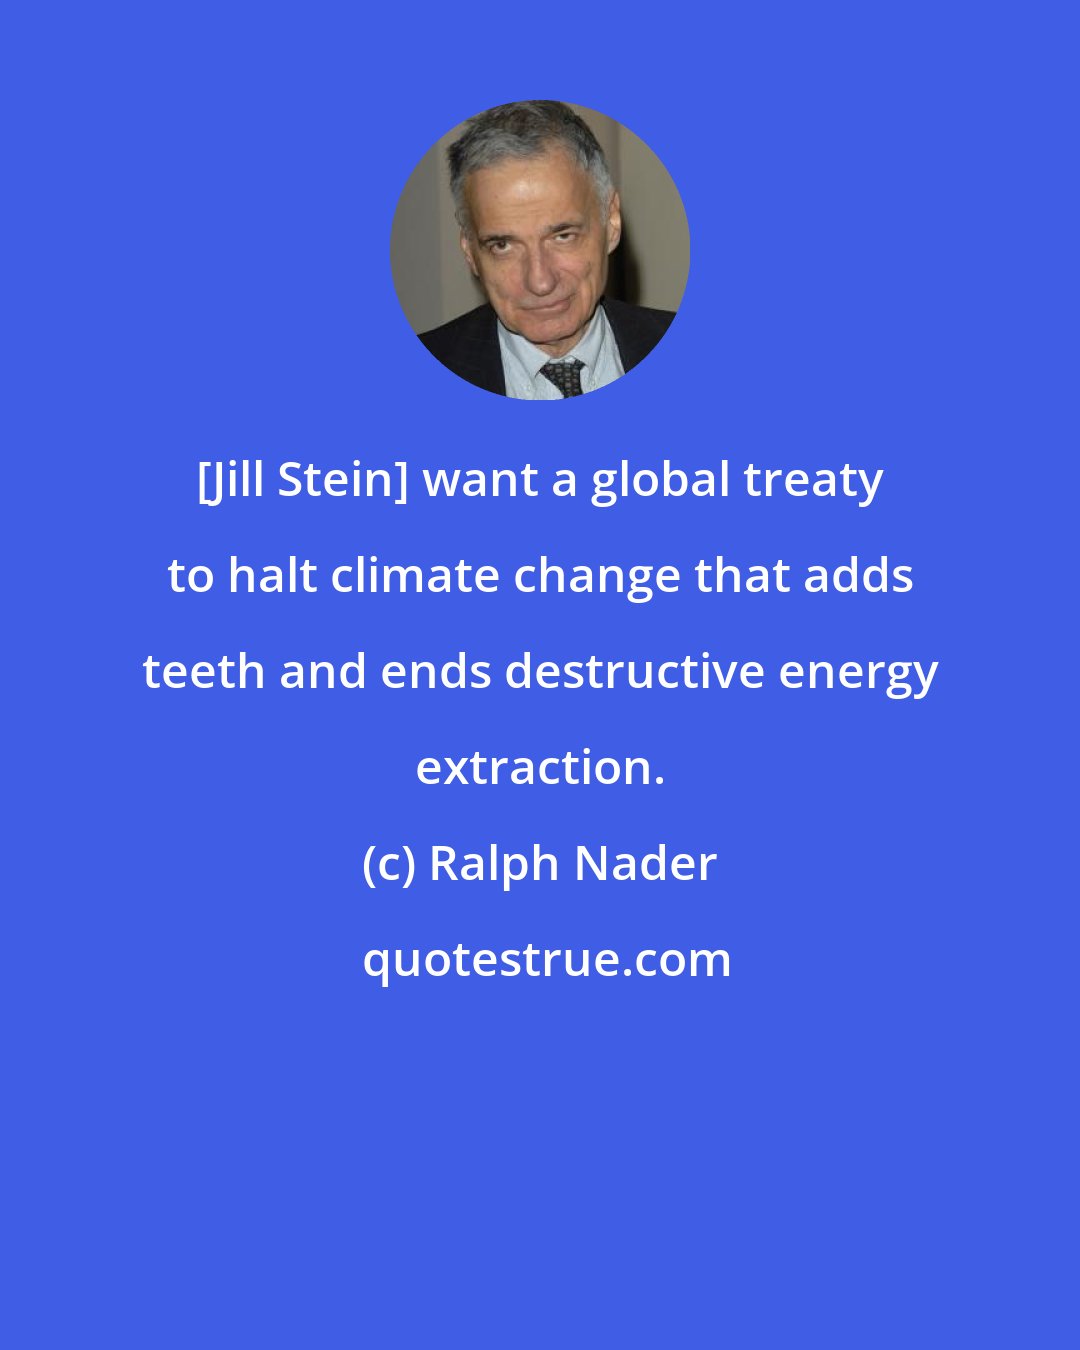 Ralph Nader: [Jill Stein] want a global treaty to halt climate change that adds teeth and ends destructive energy extraction.